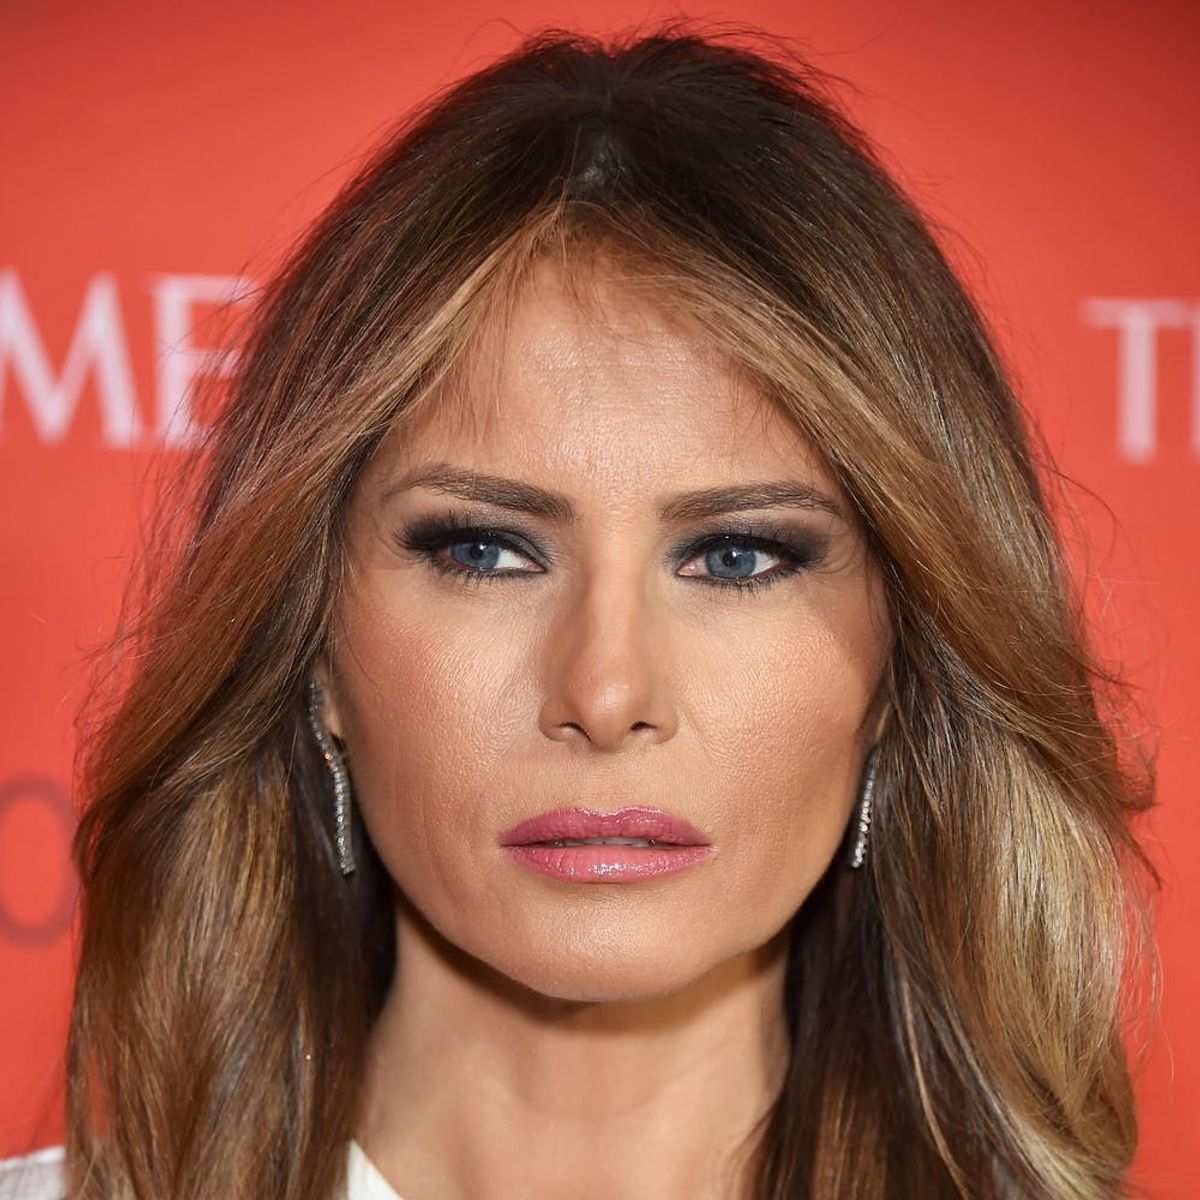 Melania Trump Is Not Okay With Donald Trump’s Lewd Comments